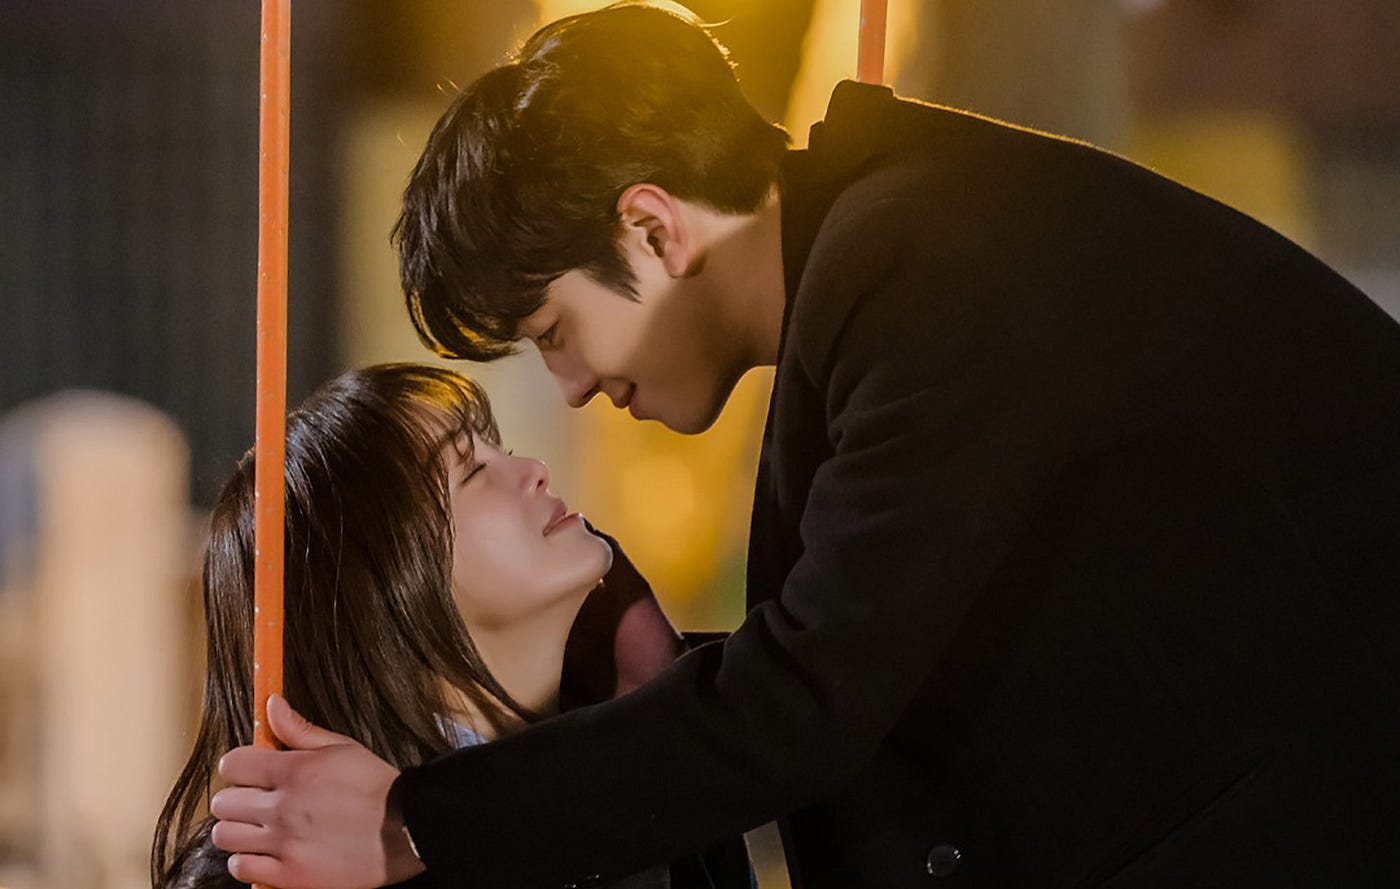 Kdrama Review: Business Proposal